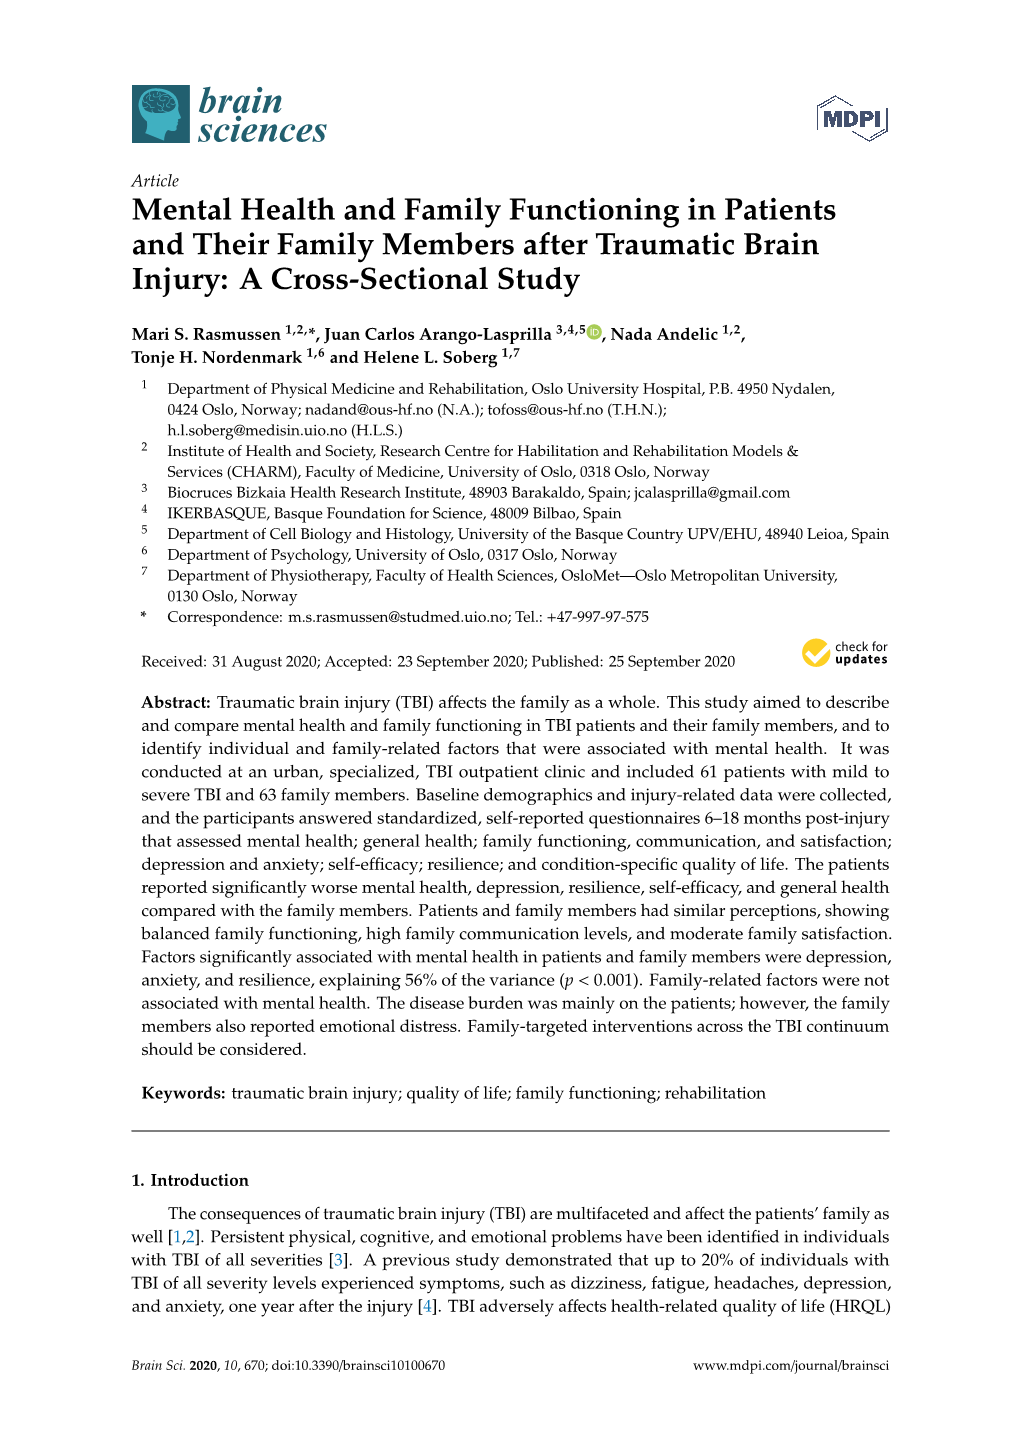 Mental Health and Family Functioning in Patients and Their Family Members After Traumatic Brain Injury: a Cross-Sectional Study